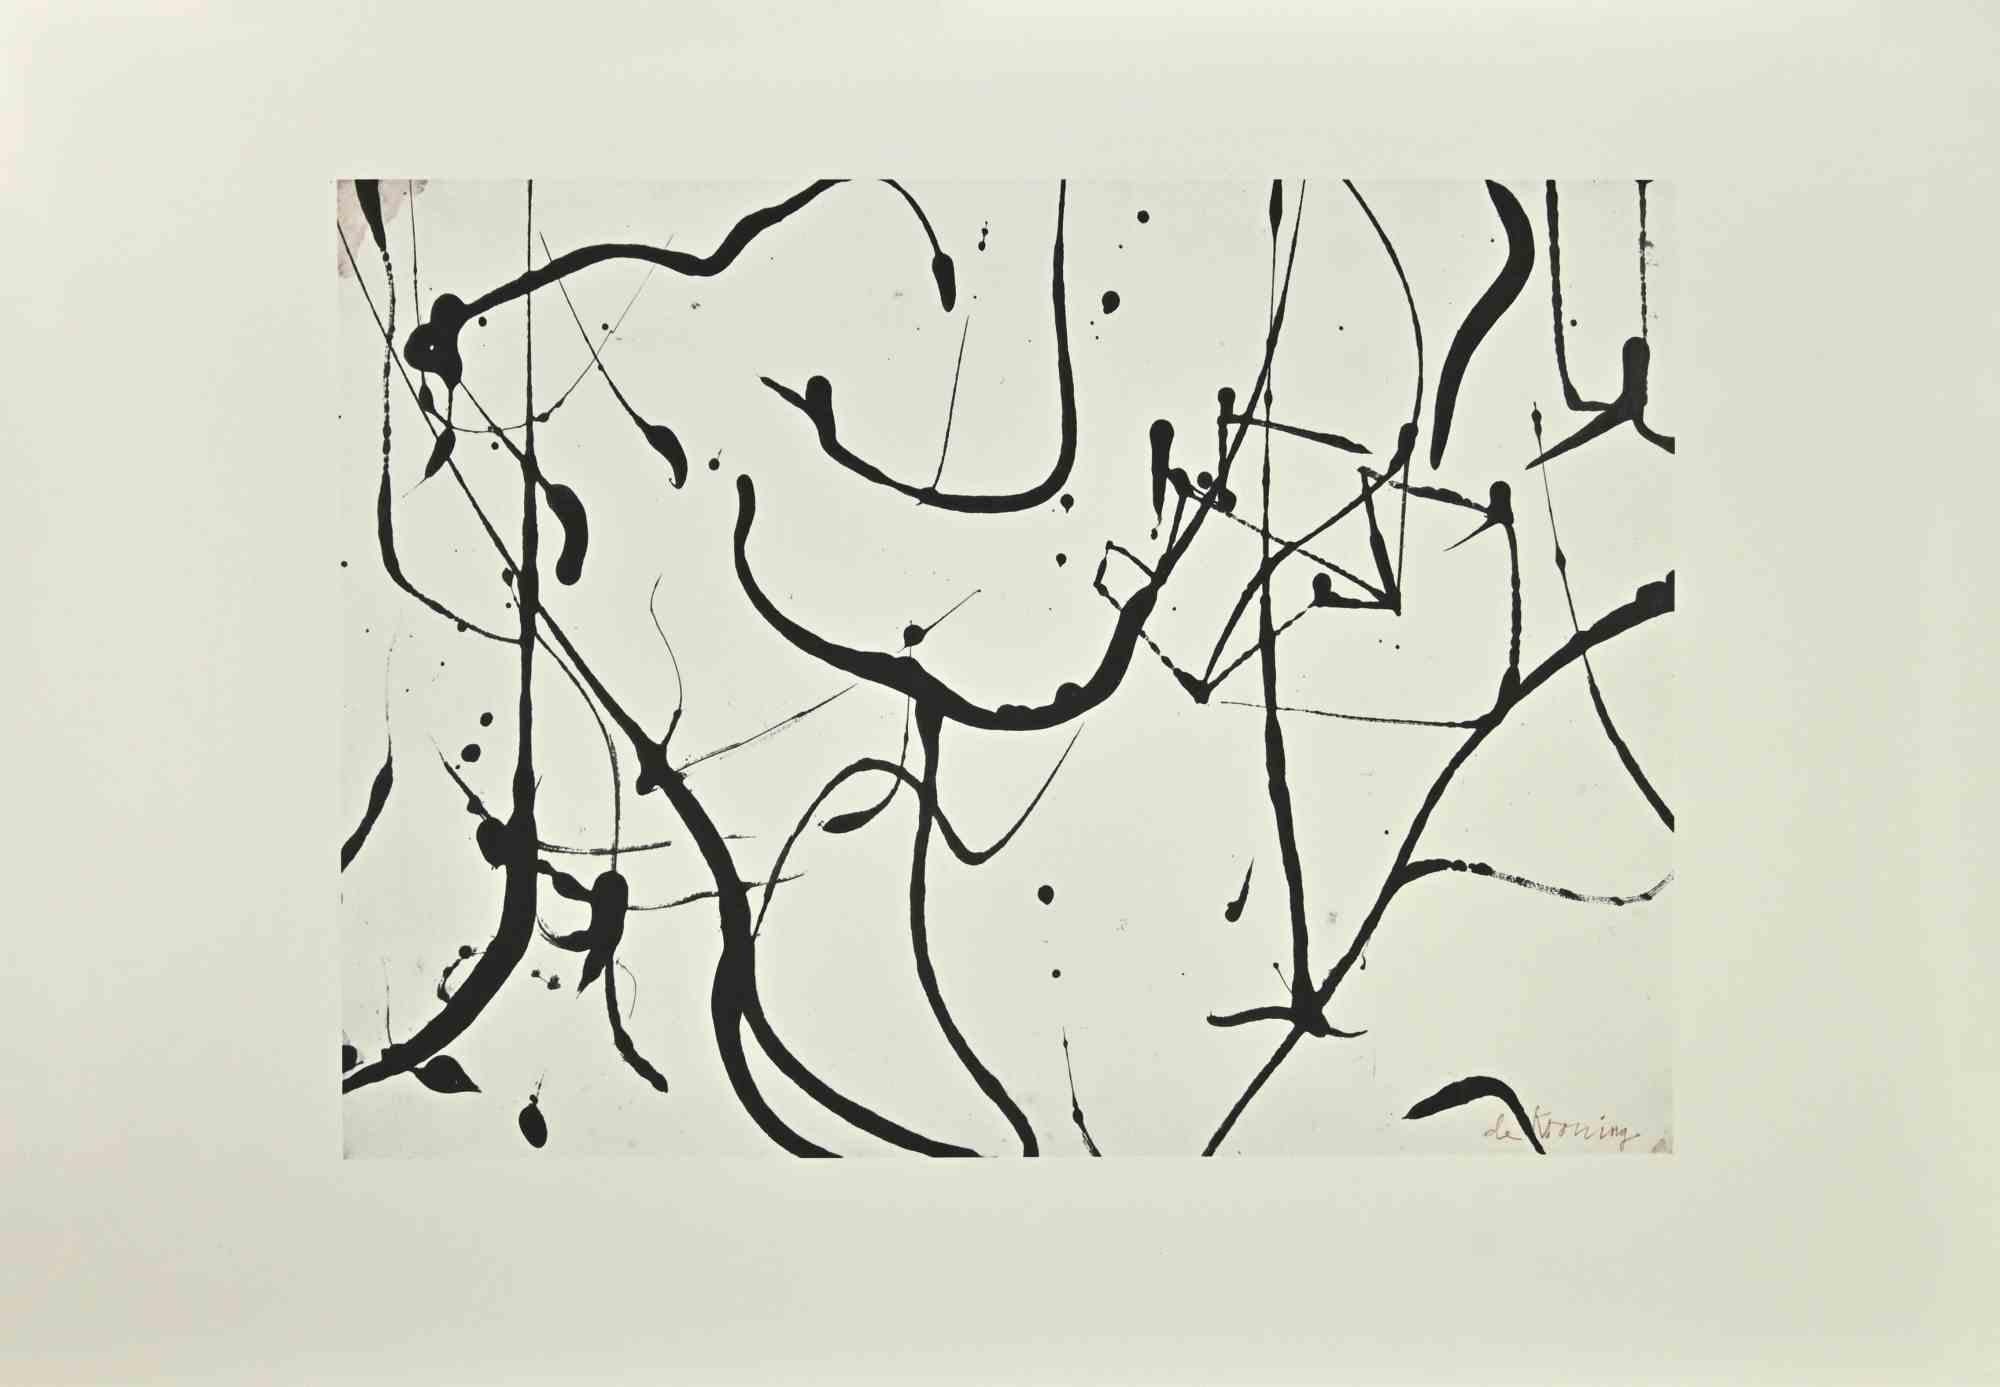 Willem de Kooning Abstract Print - Abstract - Offset and Lithograph after Willem De Kooning - 1985